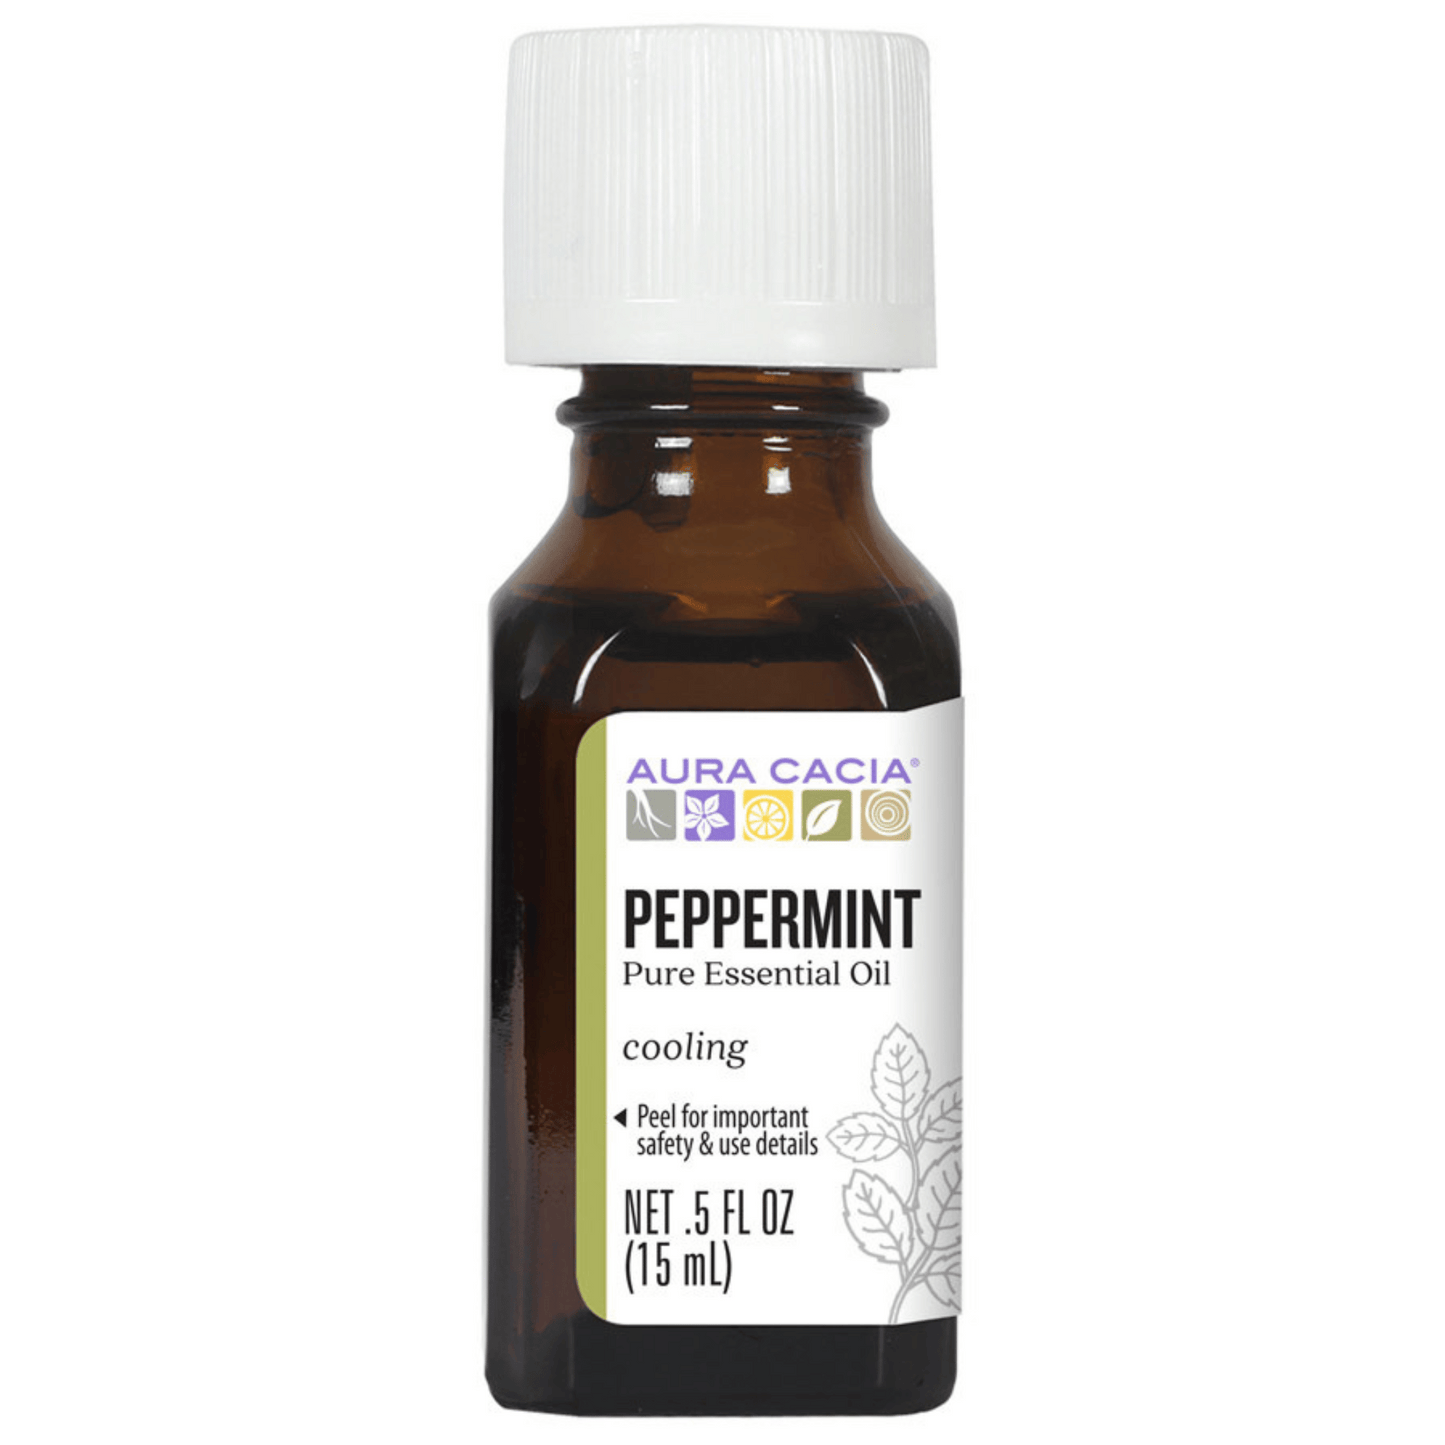 Primary Image of Peppermint Essential Oil